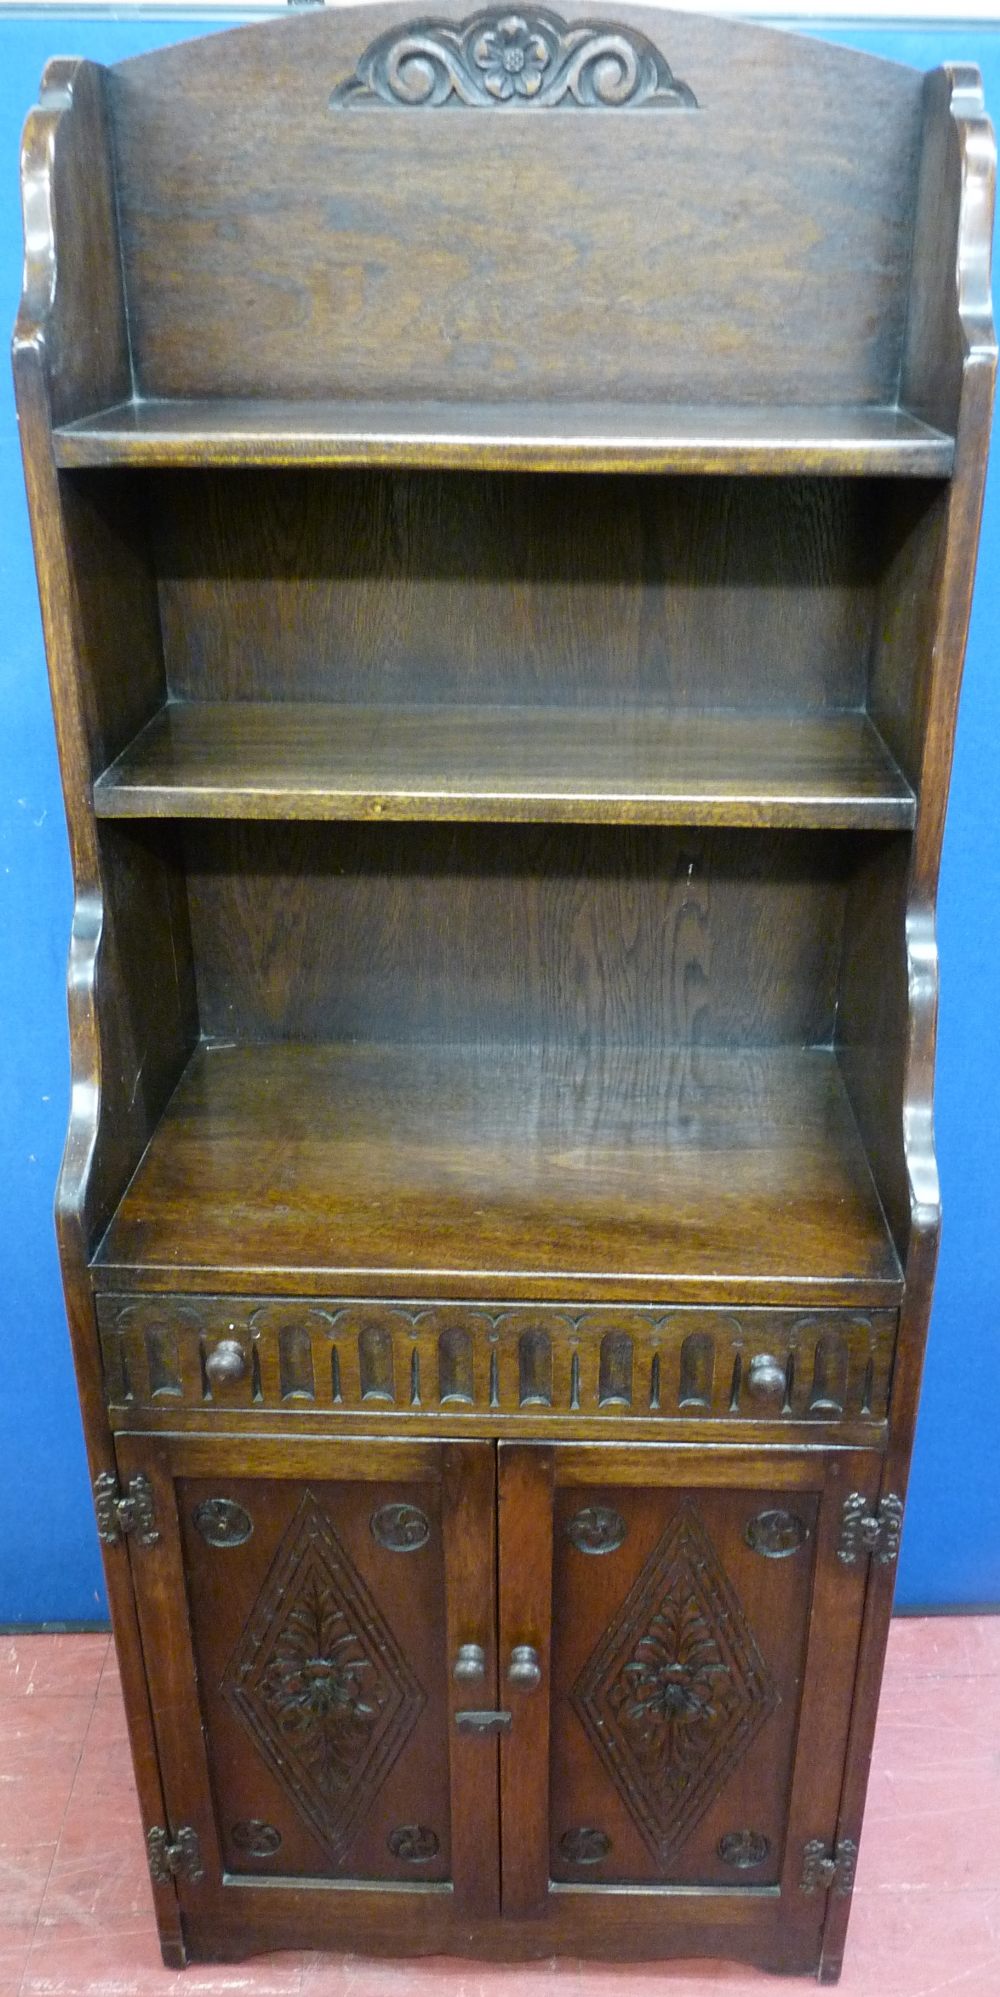 A REPRODUCTION OAK BOOKCASE CUPBOARD, the waterfall top with central carving and fixed shelves above